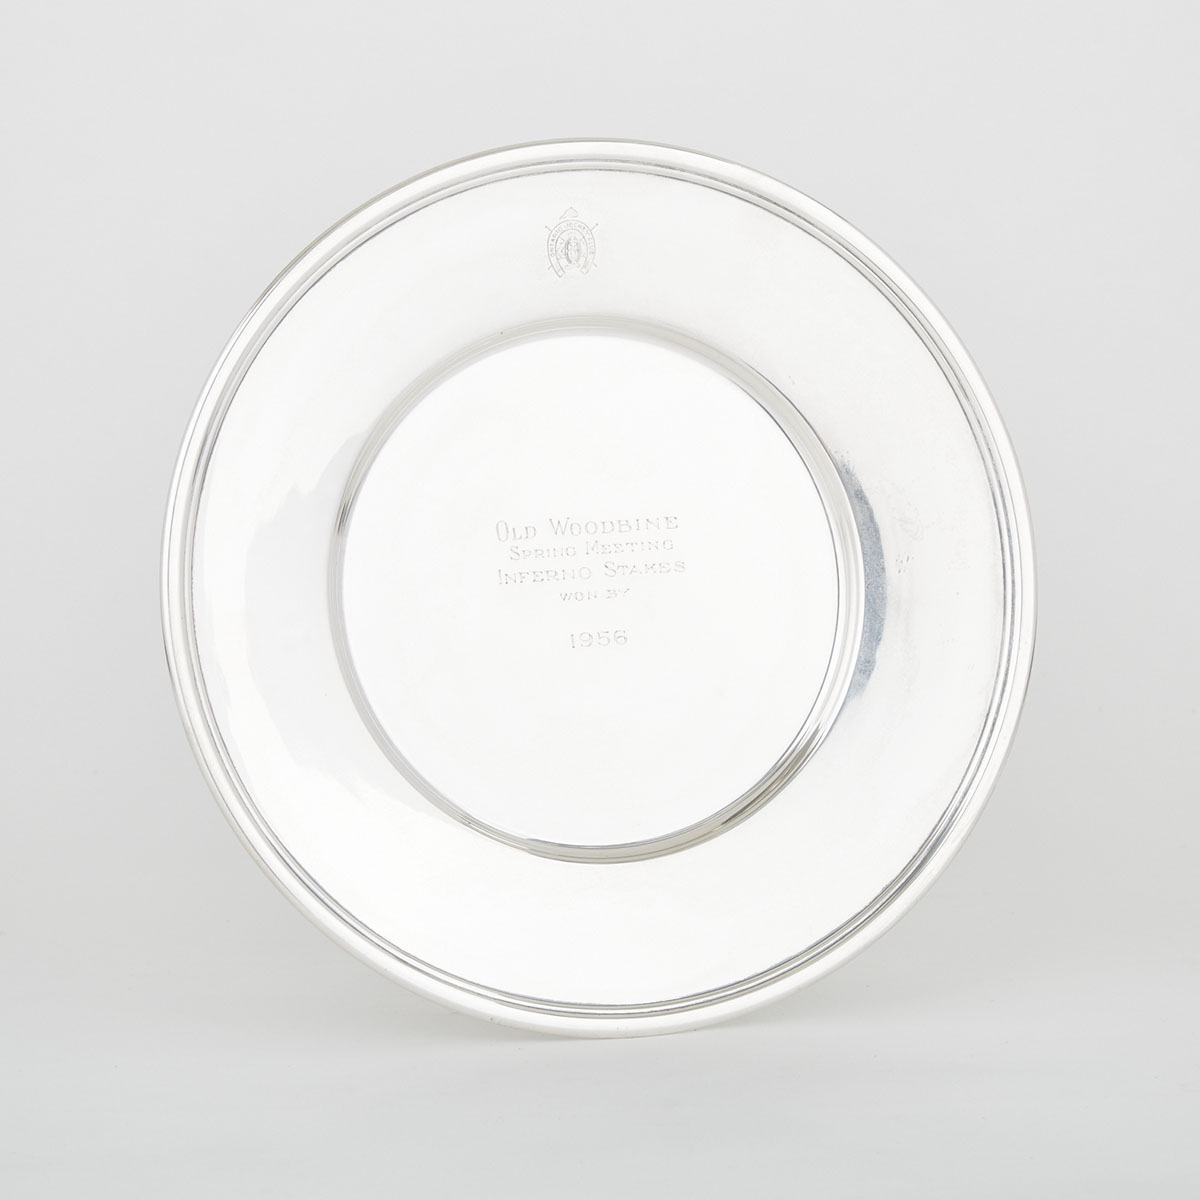 Canadian Silver ‘Inferno Stakes’ Plate, Mappin, Montreal, Que., 1956